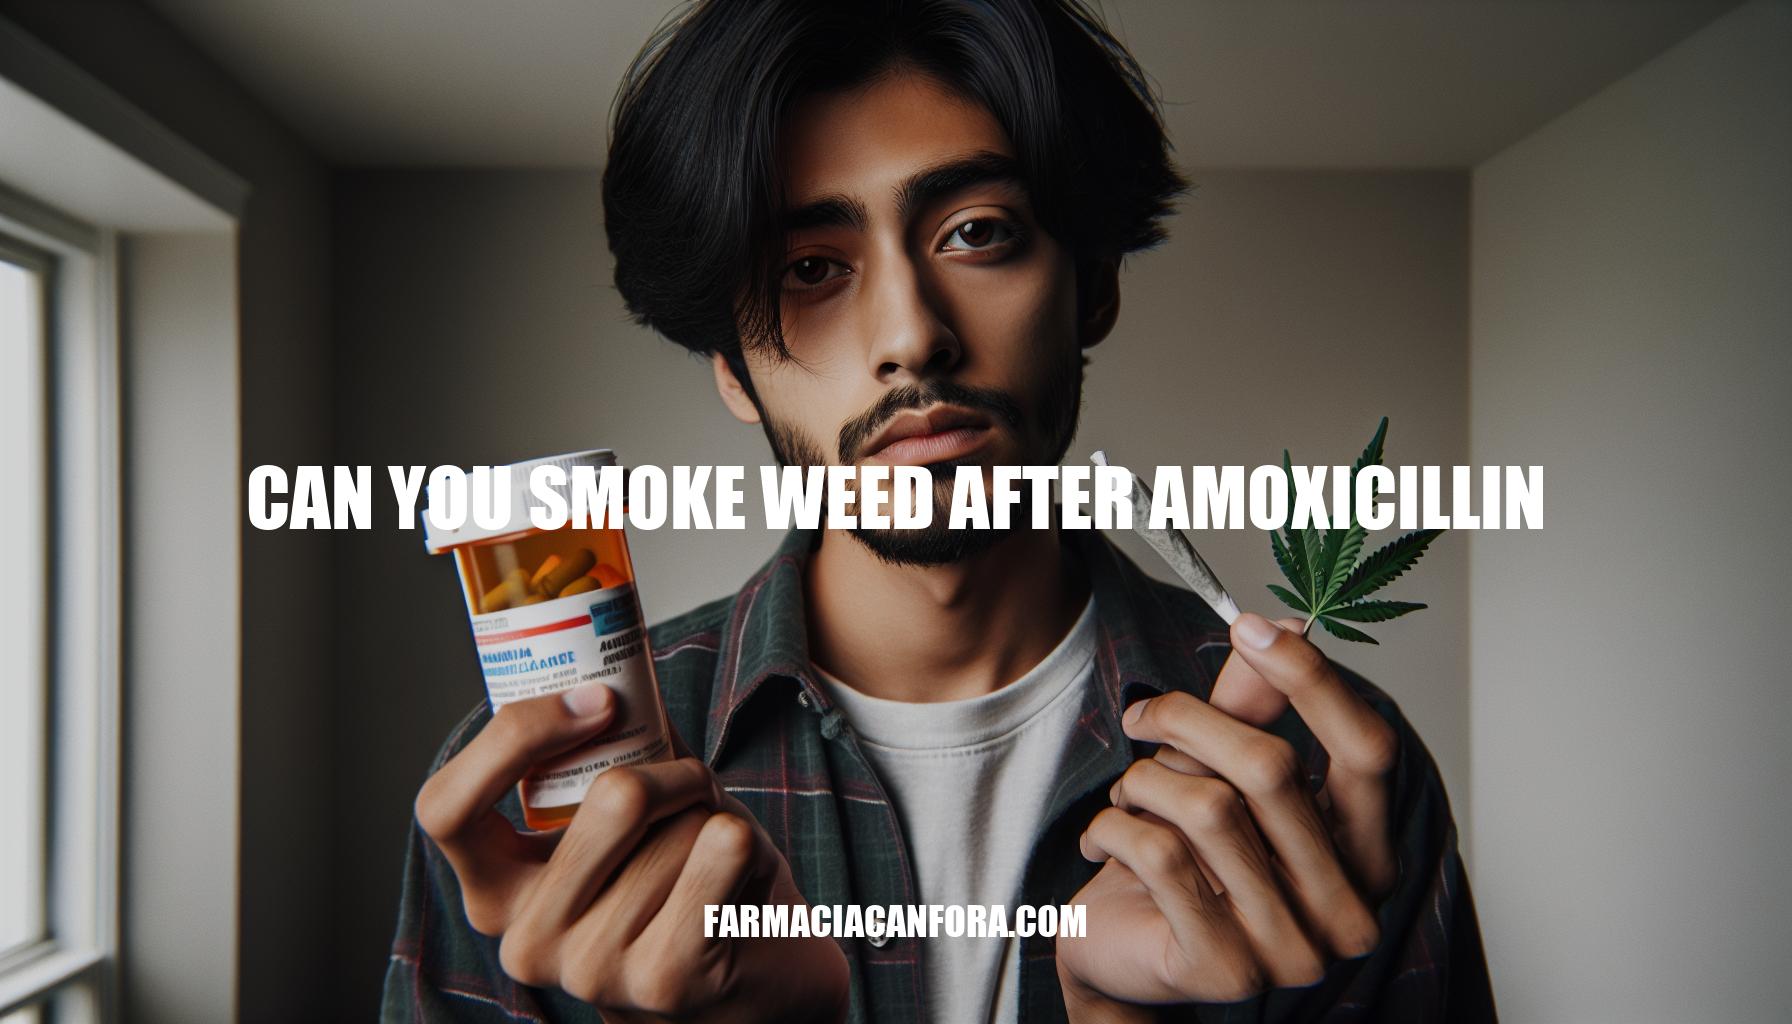 Can You Smoke Weed After Amoxicillin: Risks and Considerations